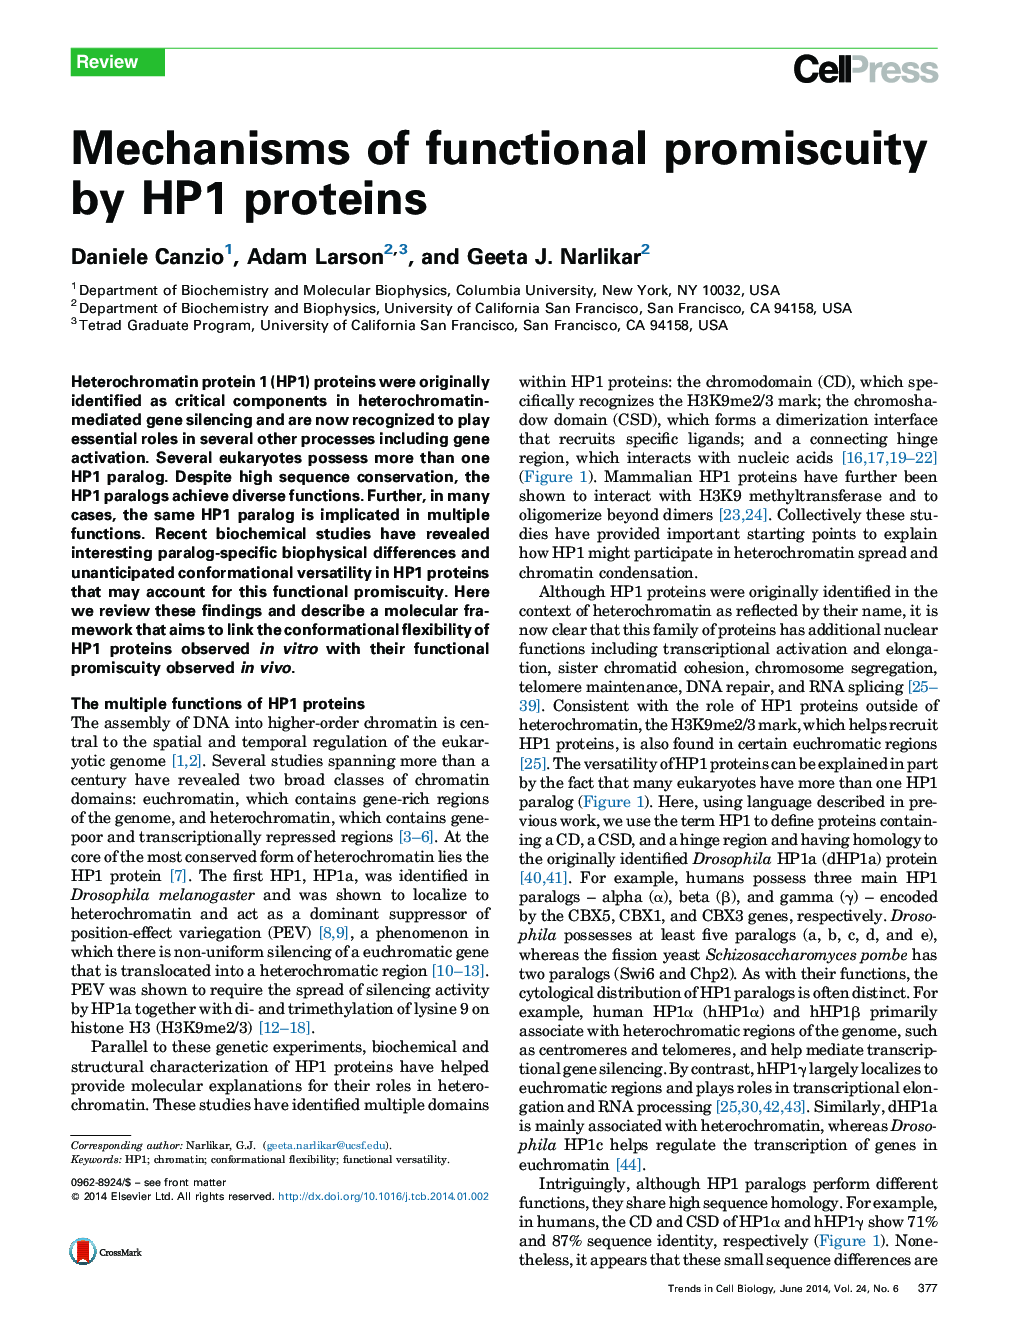 Mechanisms of functional promiscuity by HP1 proteins